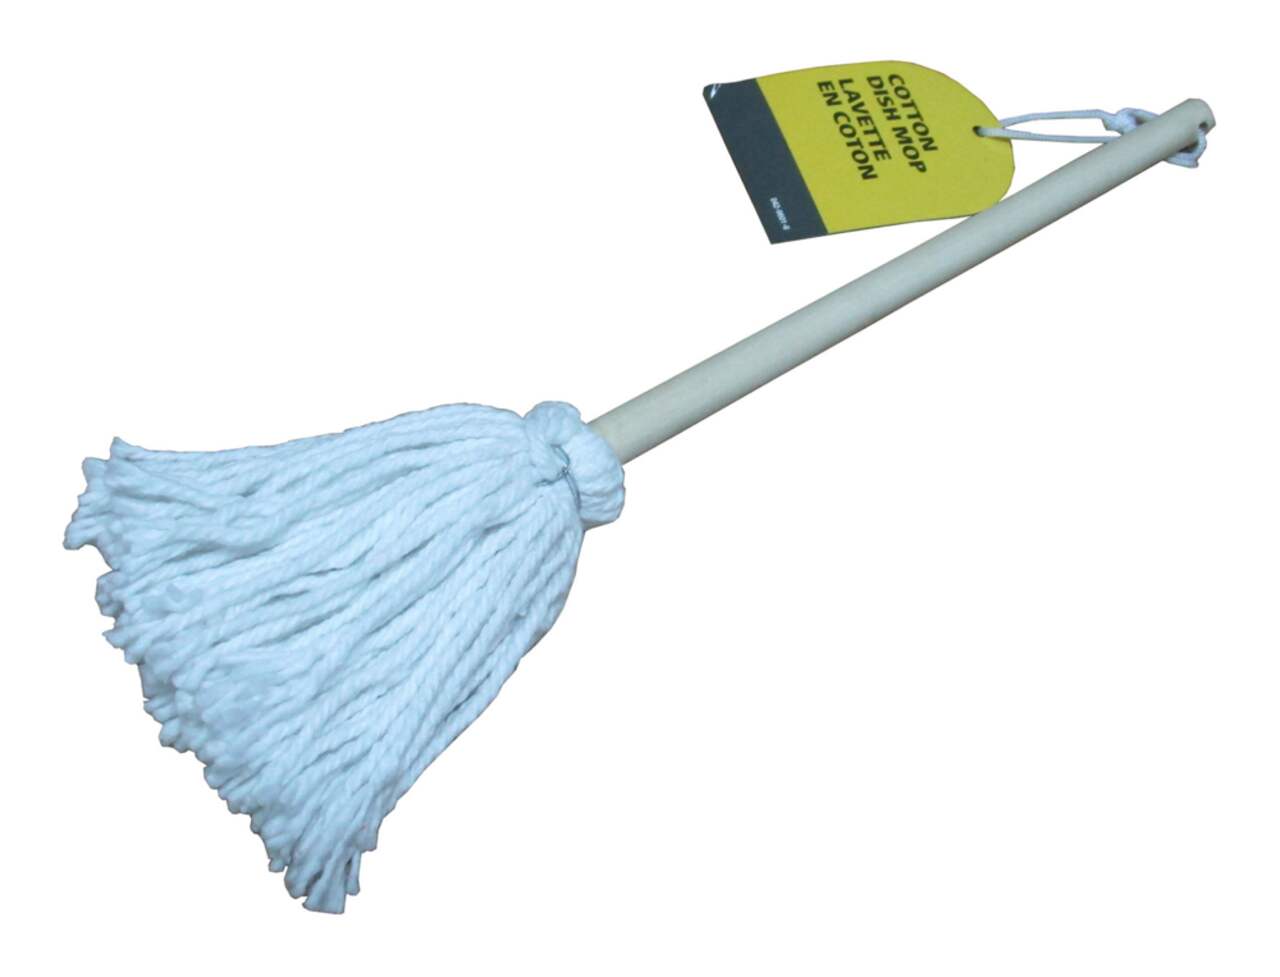 https://media-www.canadiantire.ca/product/living/cleaning/household-cleaning-tools/0429601/cotton-dish-mop-ccbde70e-ed86-410a-8a50-003628d76ad7.png?imdensity=1&imwidth=1244&impolicy=mZoom